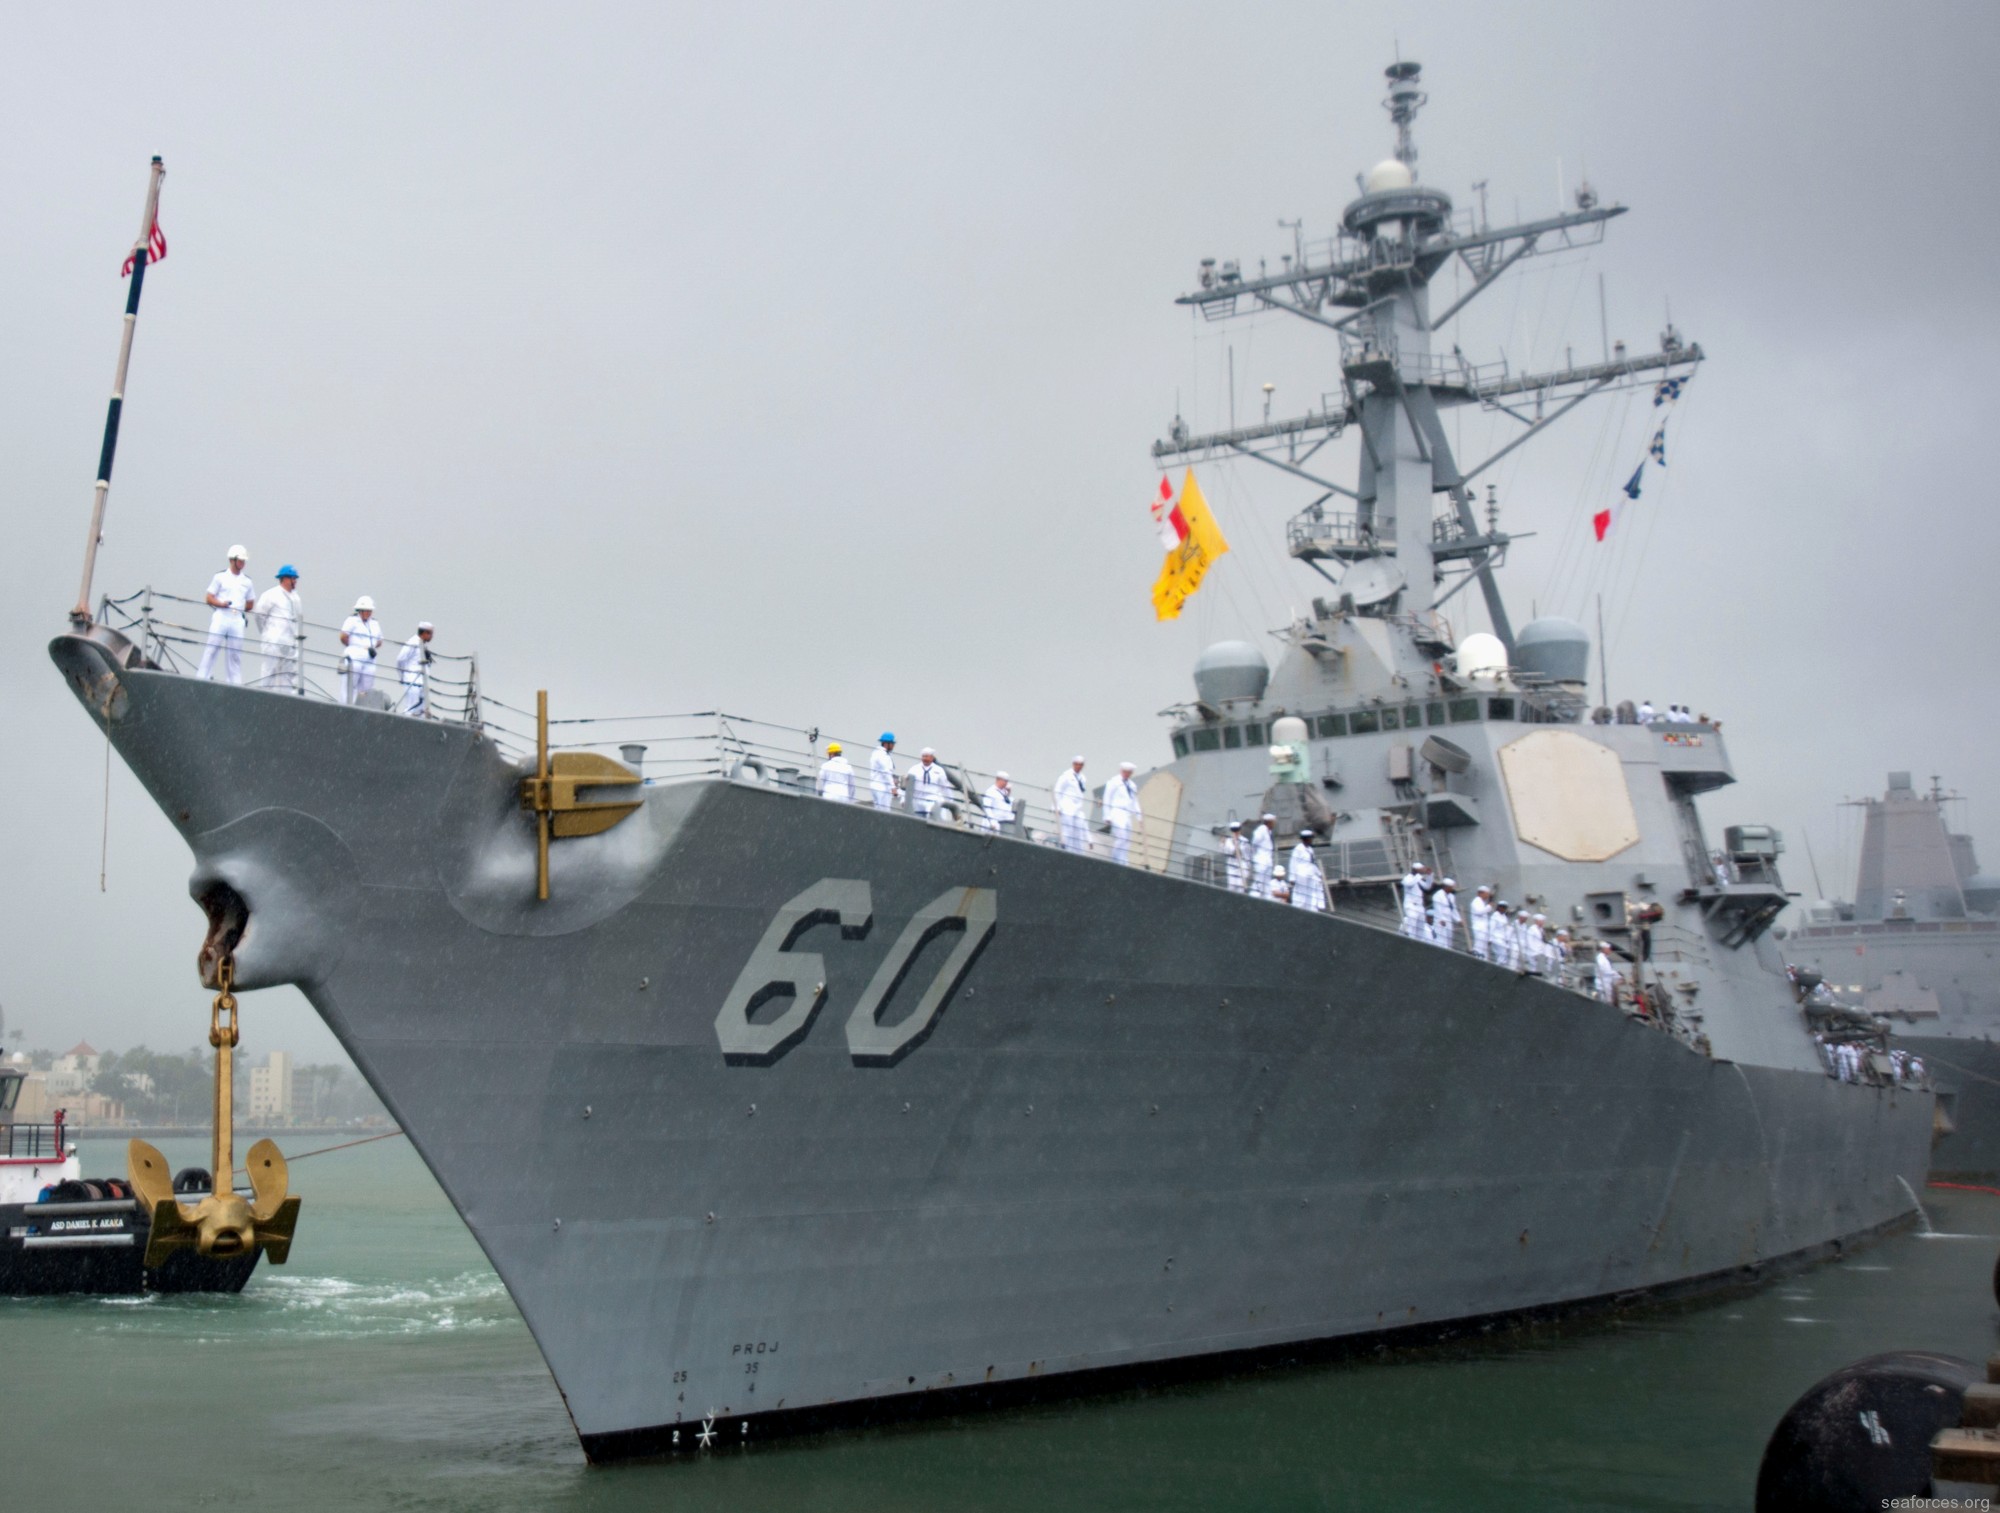 ddg-60 uss paul hamilton guided missile destroyer us navy 04